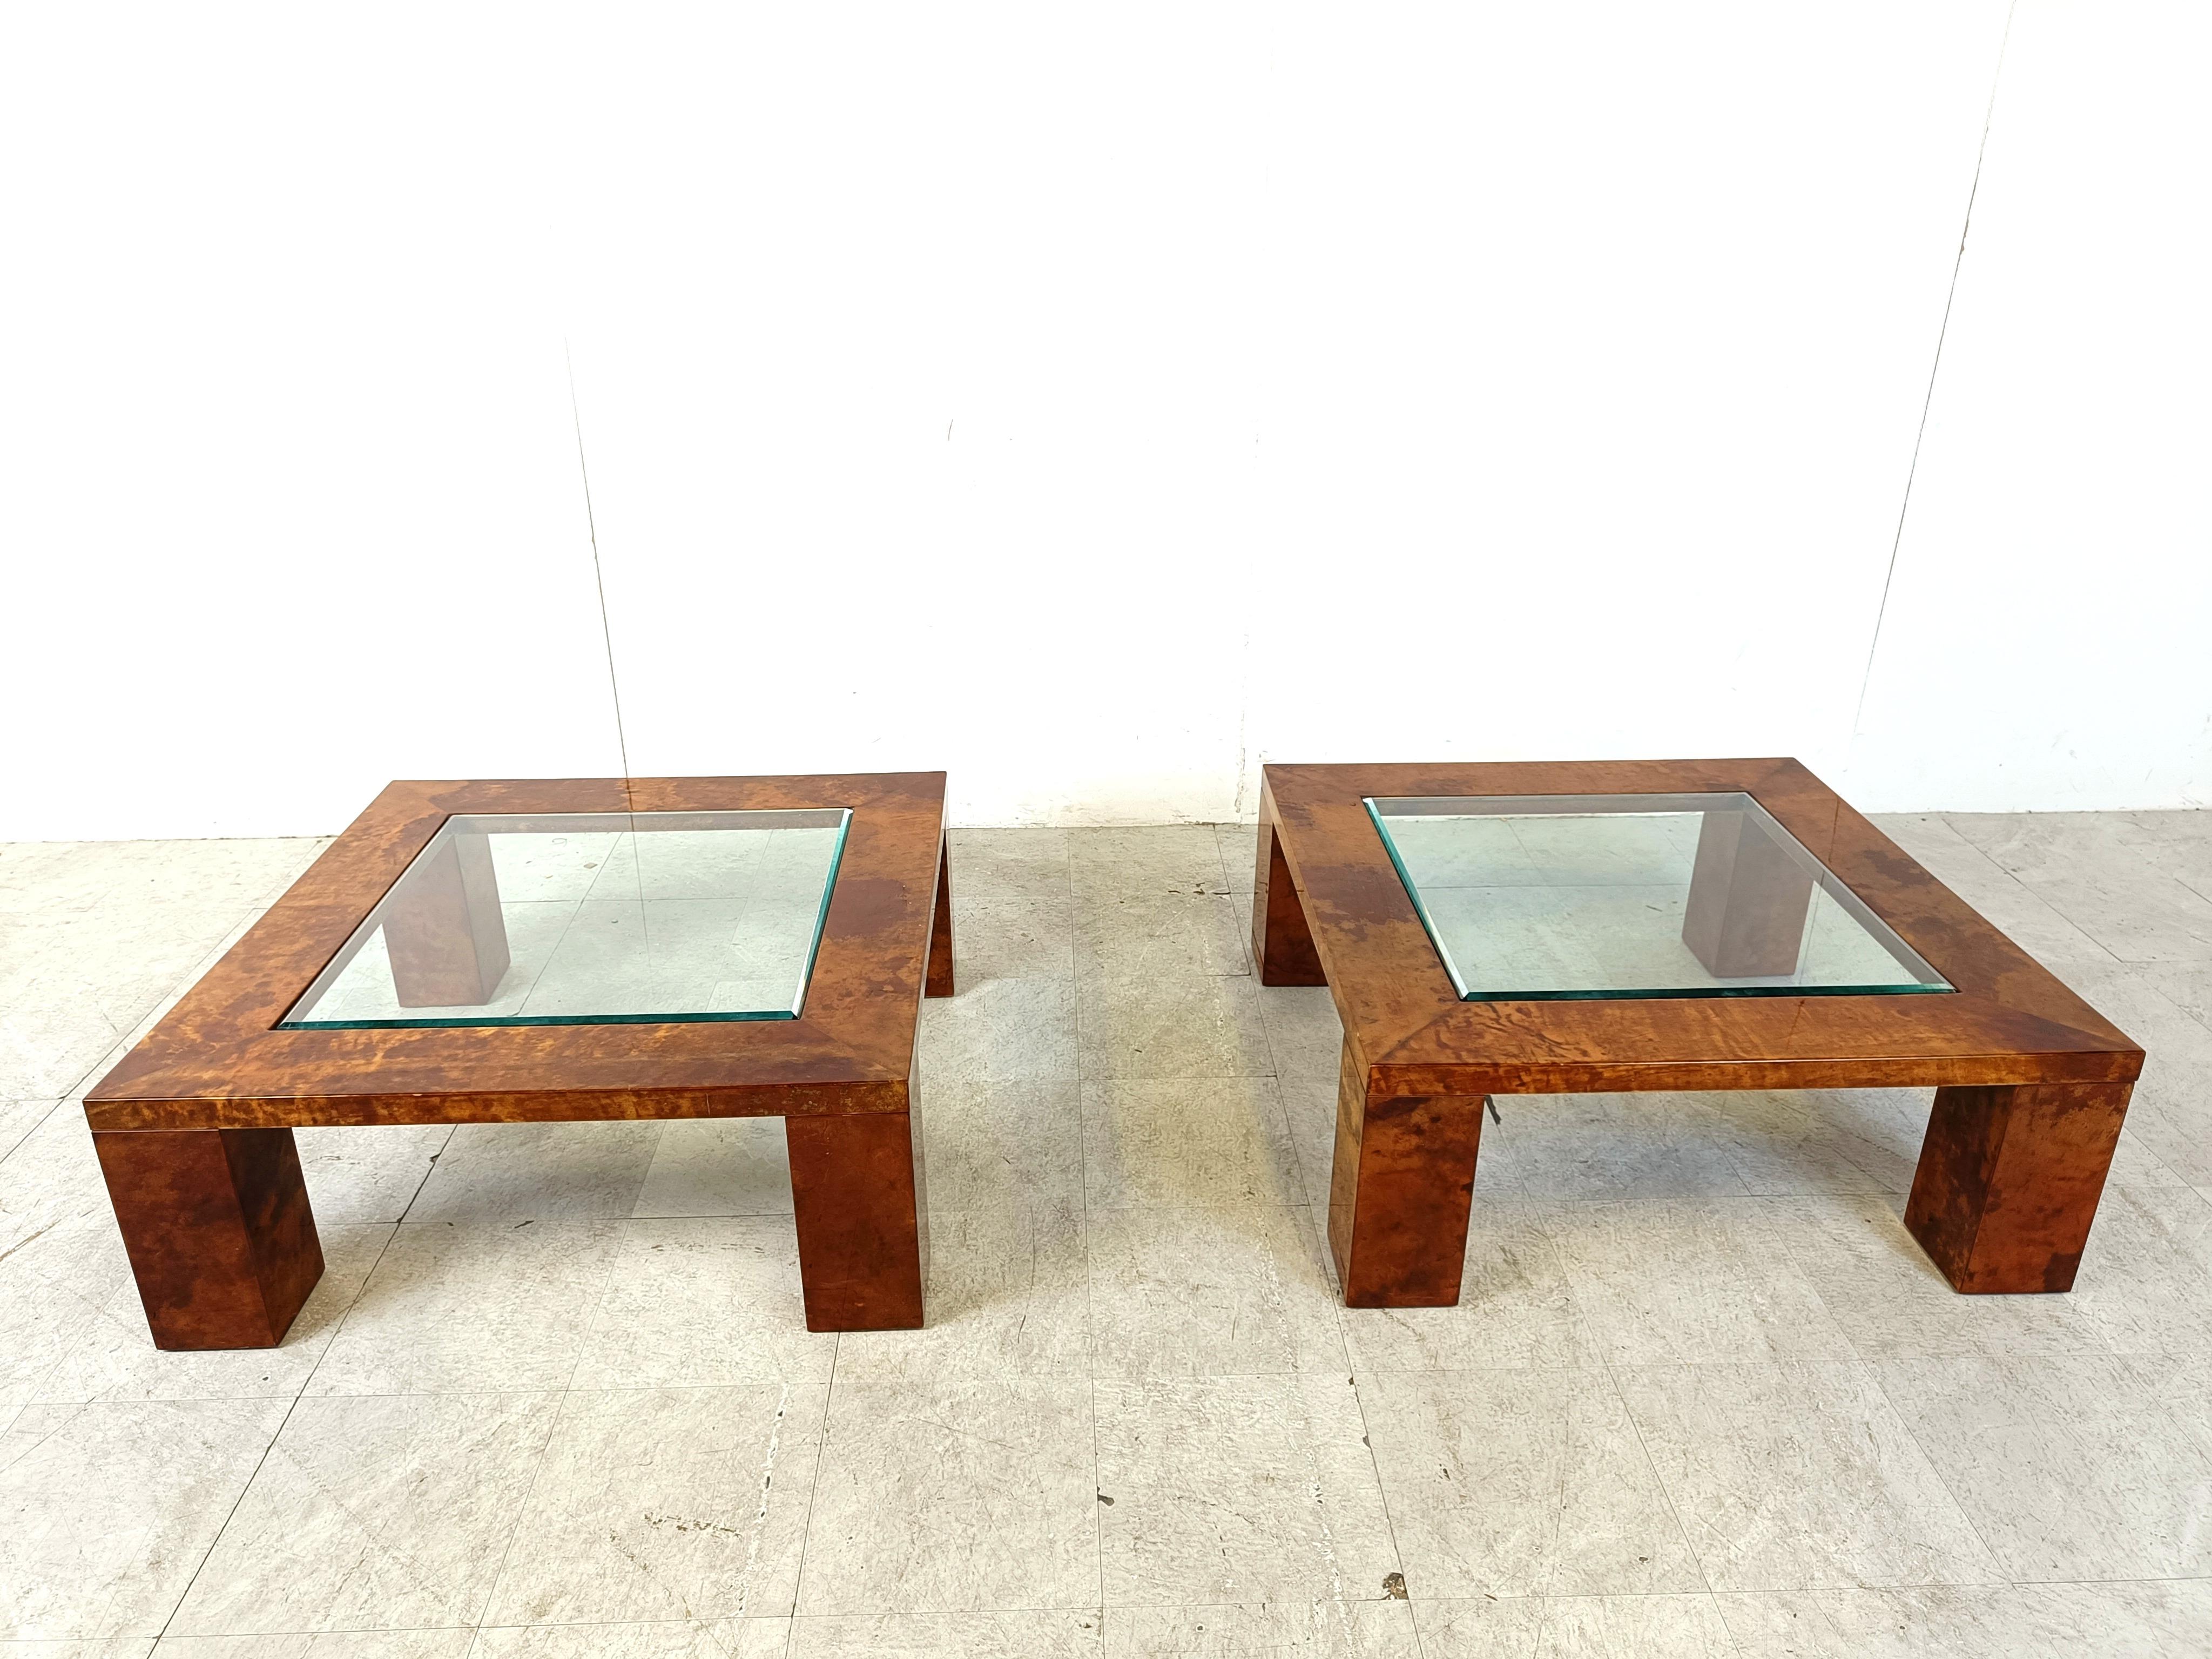 Hollywood Regency Aldo Tura Lacquered Goatskin Coffee Tables, 1960s - set of 2 For Sale